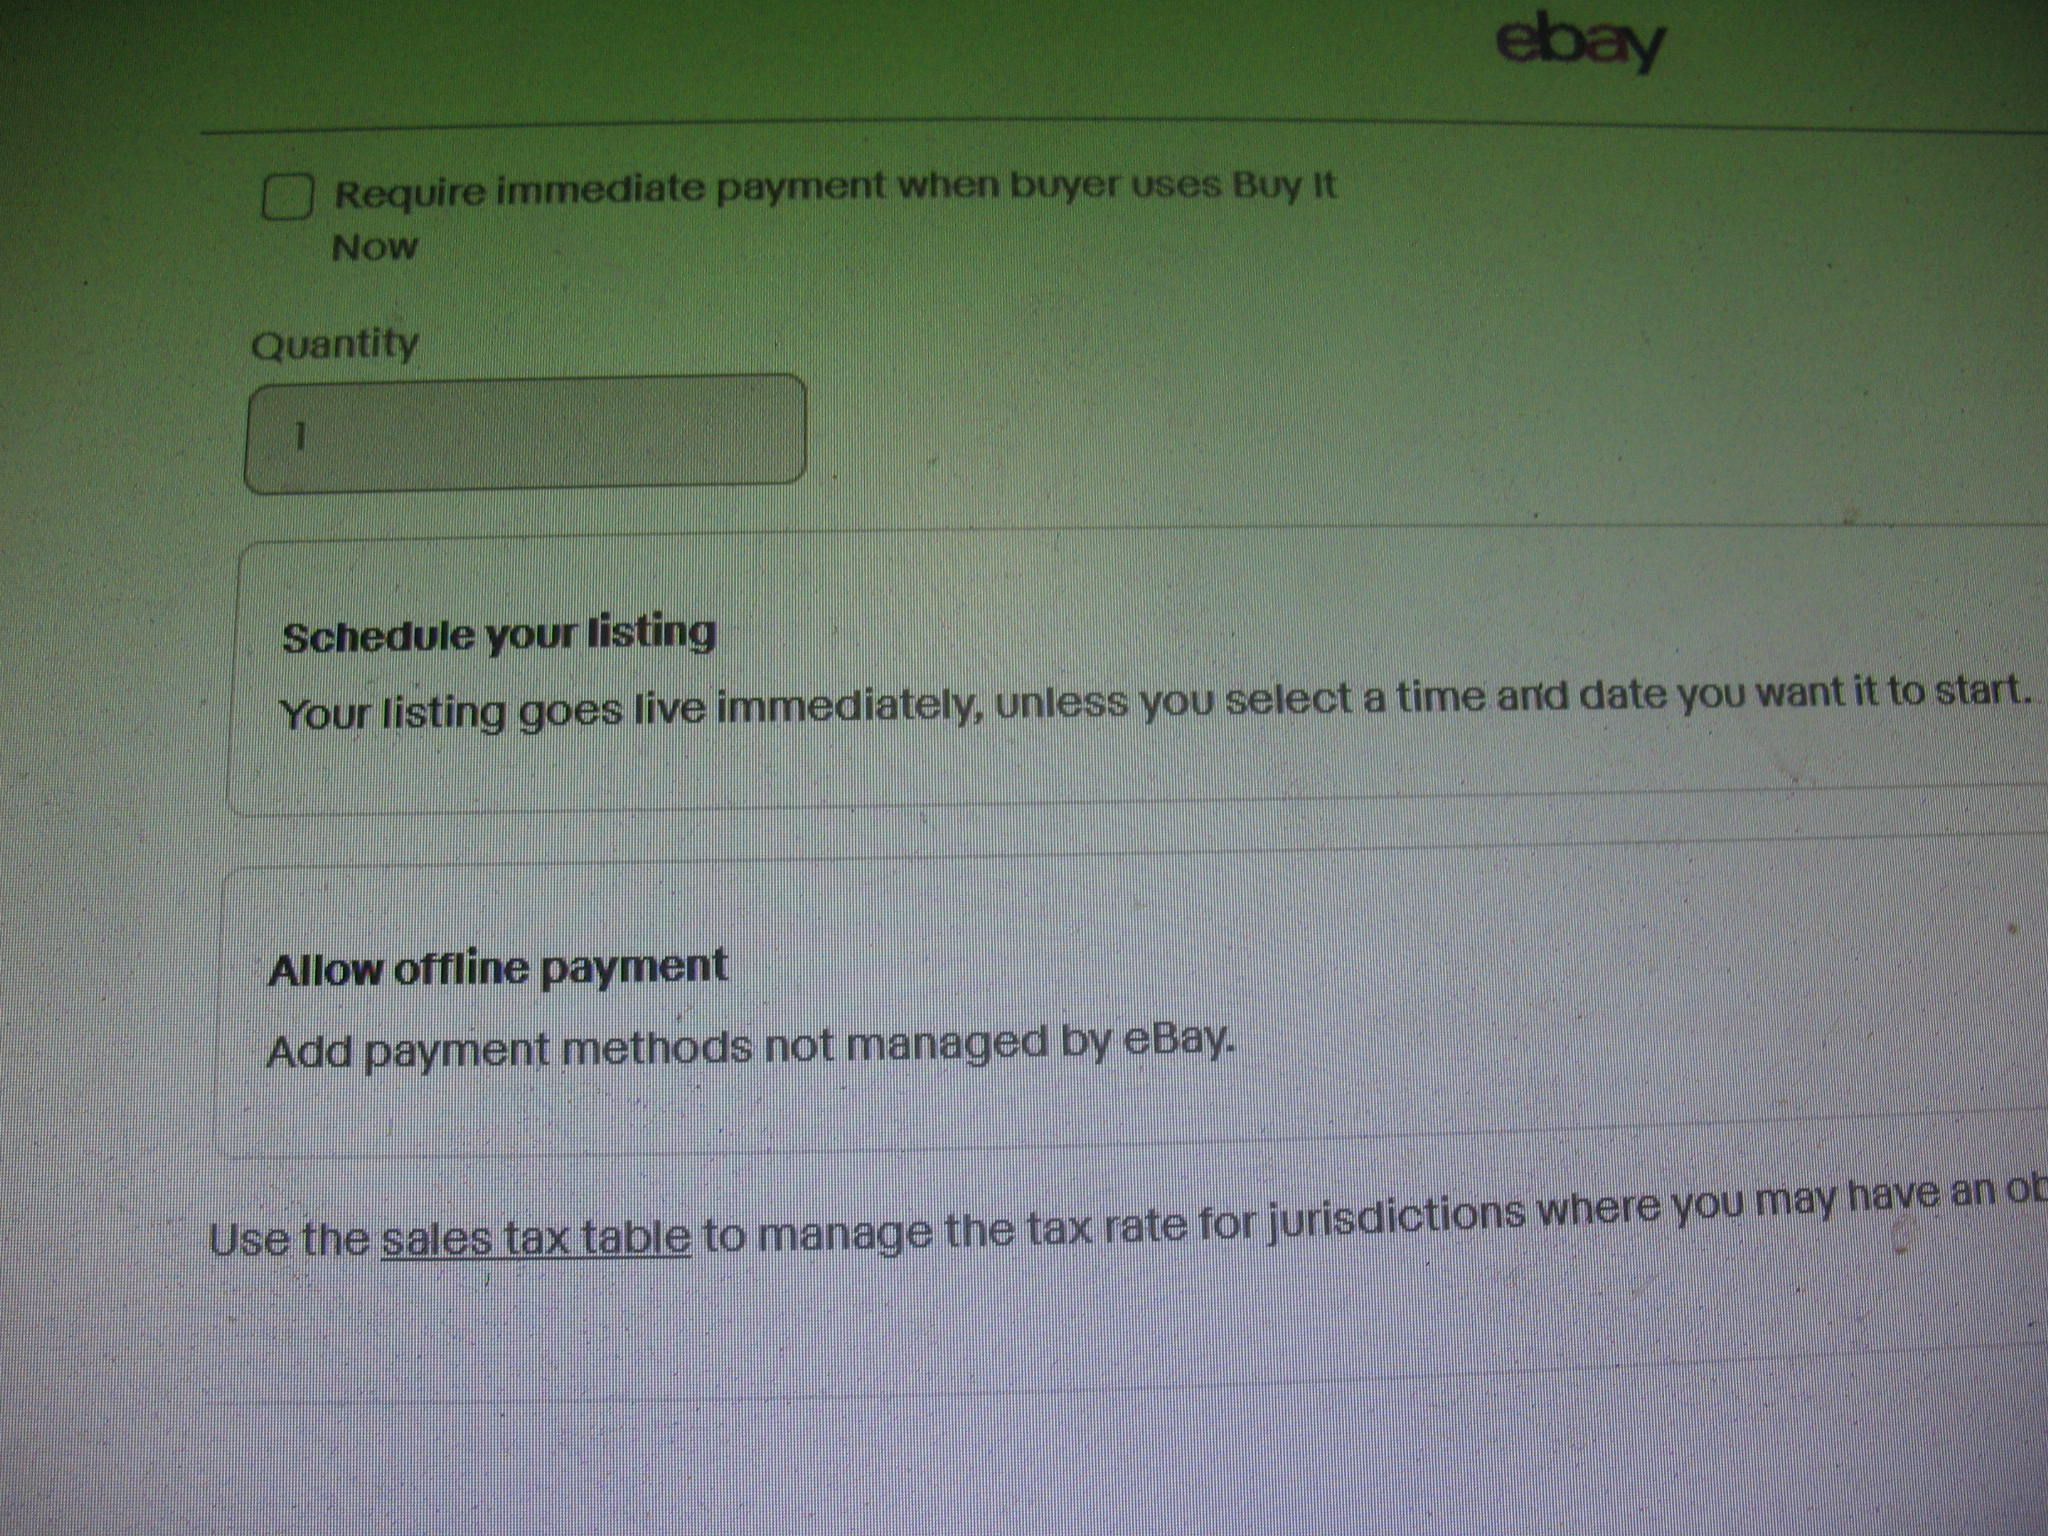 Is eBay Going Back In Time To Accept Checks, Money Orders & Cash For Offline Payment?